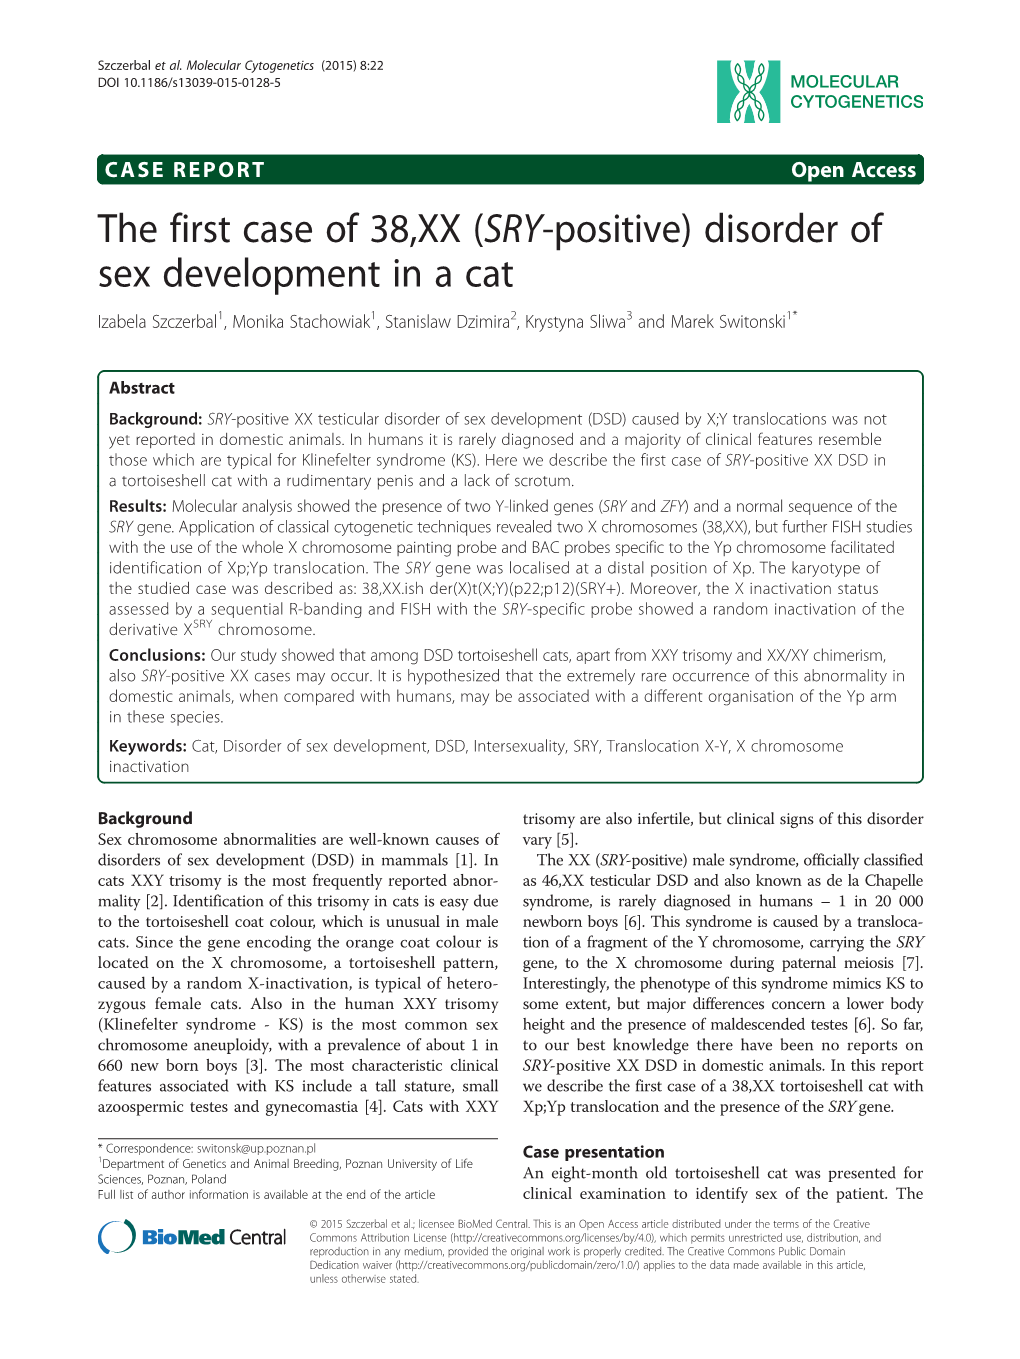 The First Case of 38,XX (SRY-Positive) Disorder of Sex Development in A